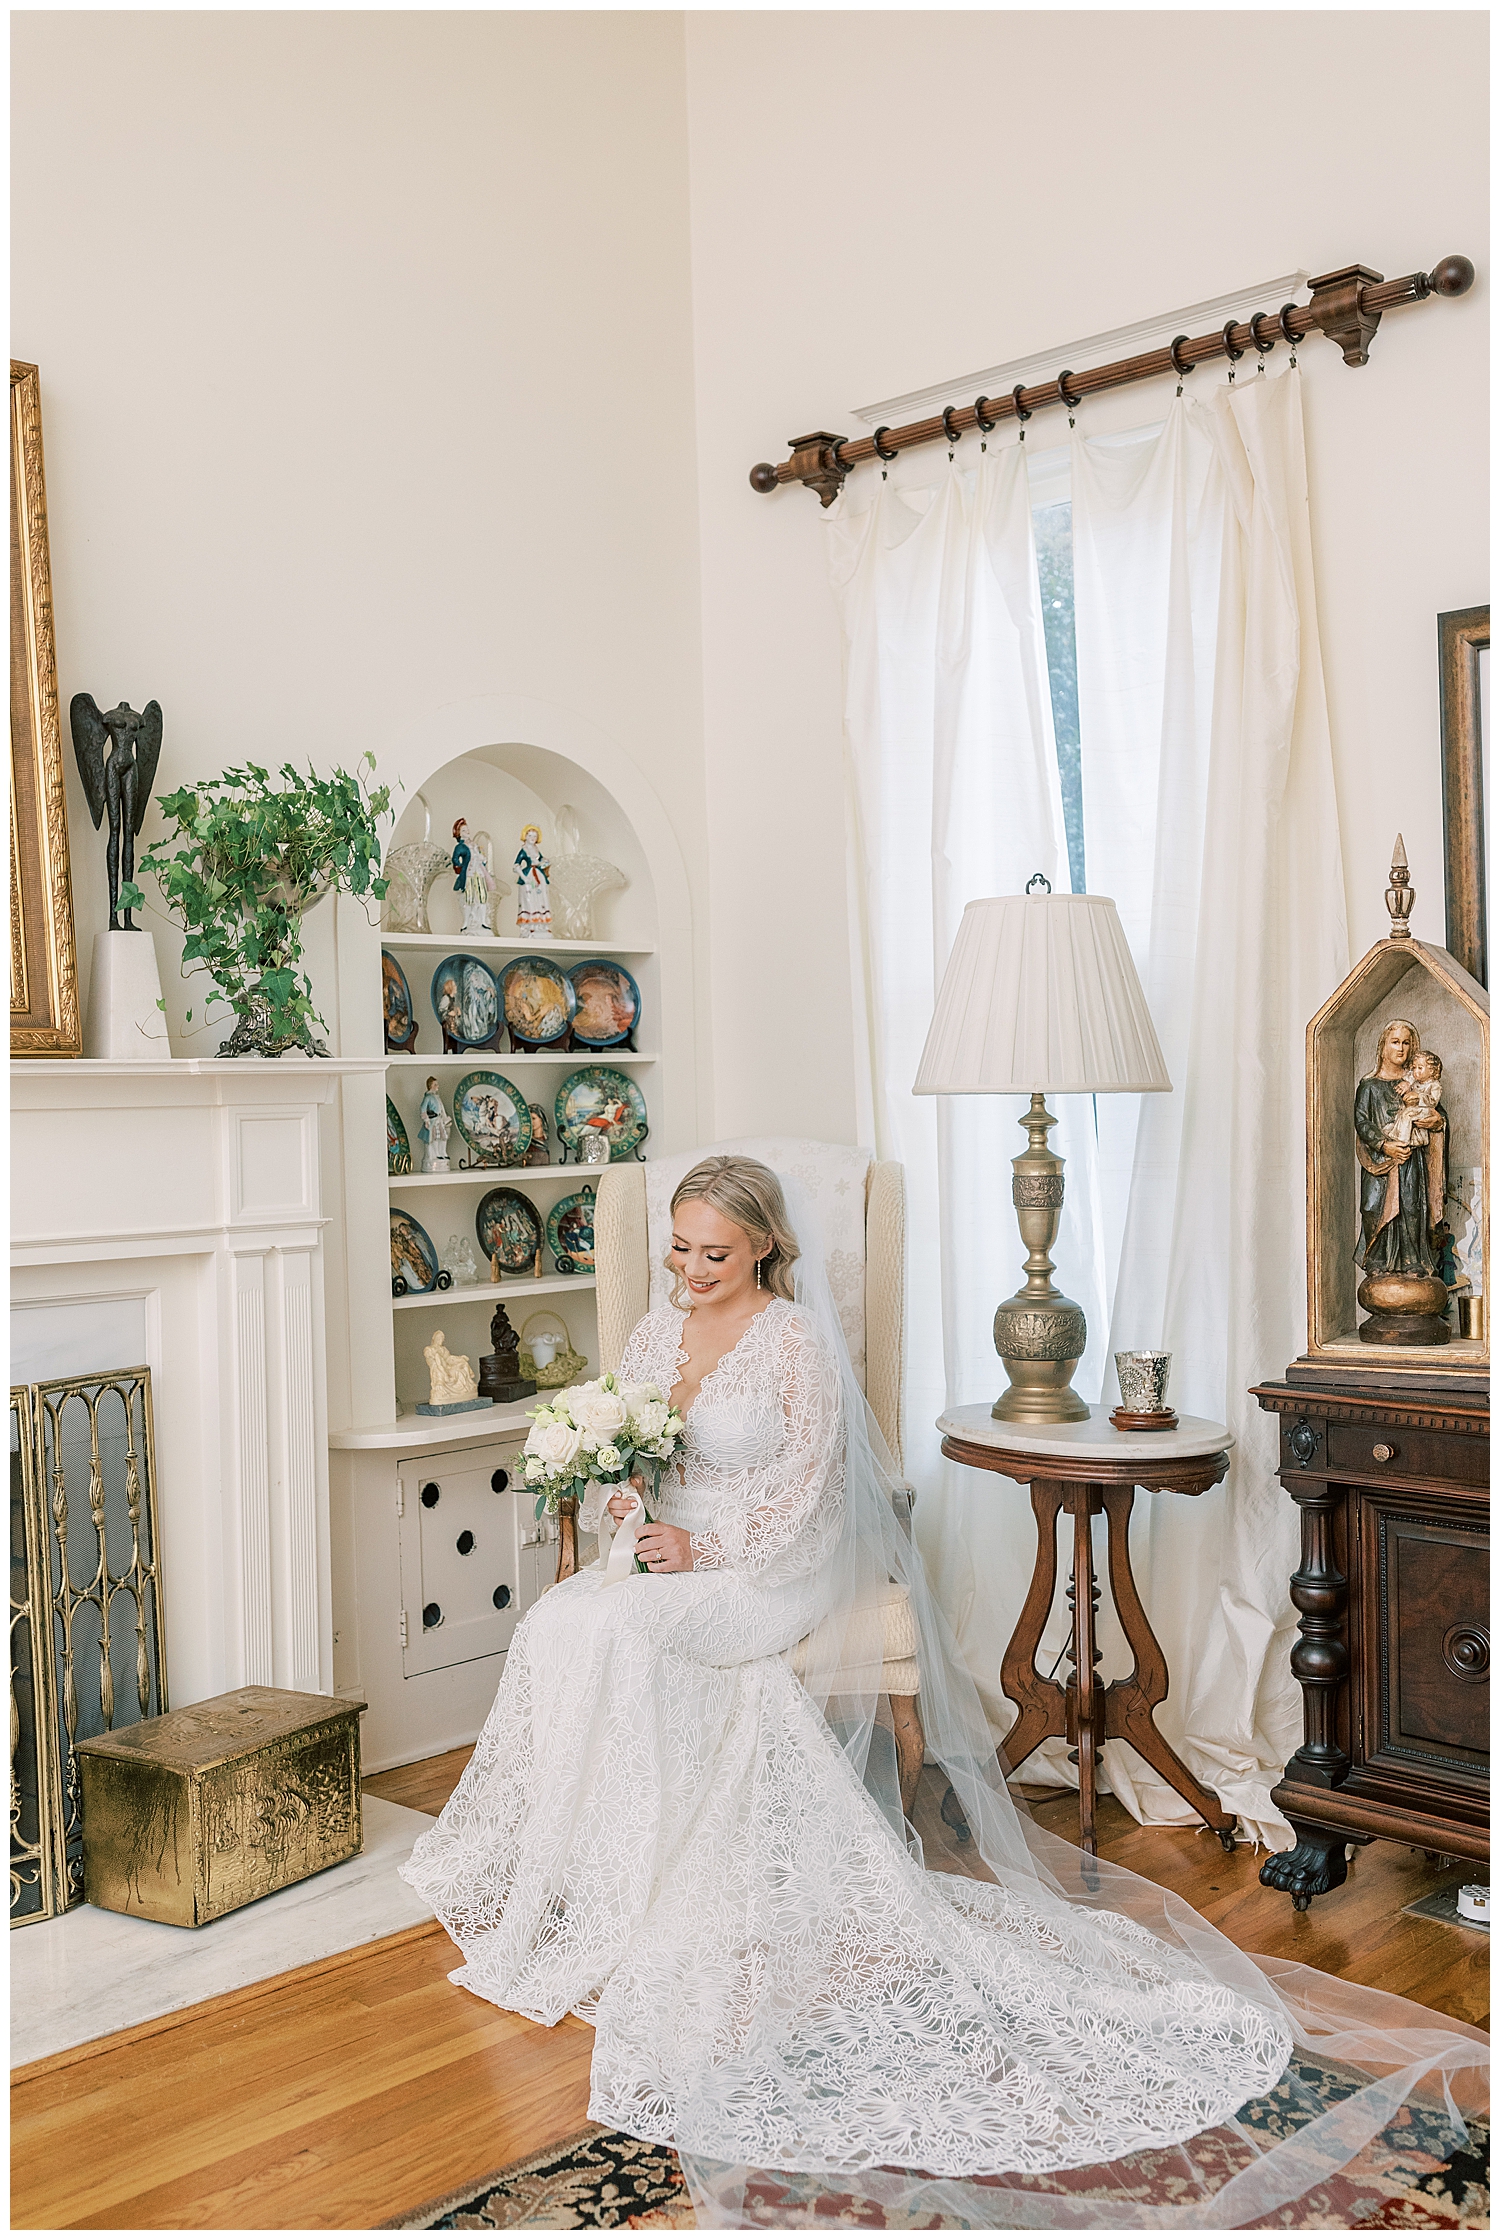 A bride sits in an antique chair.